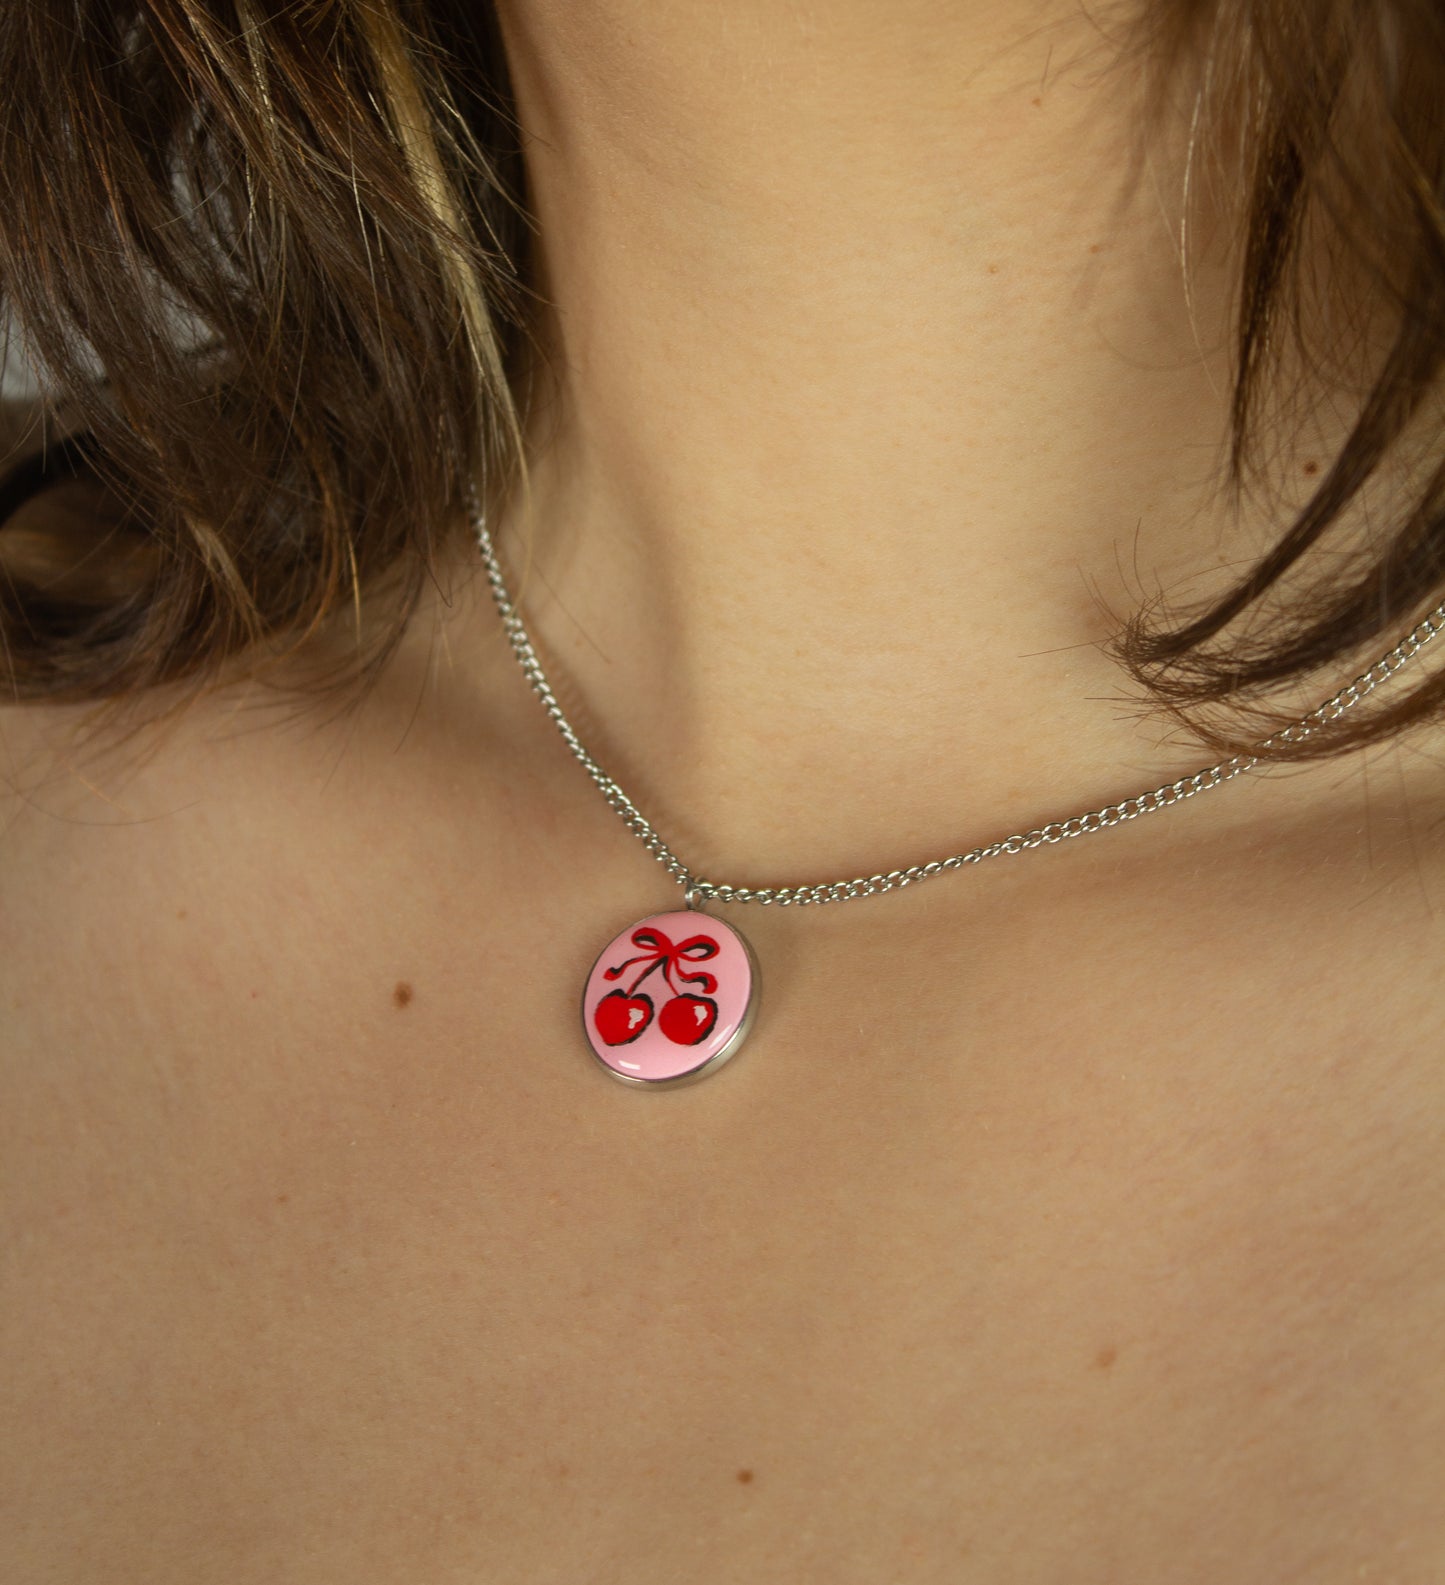 Cherry chain necklace